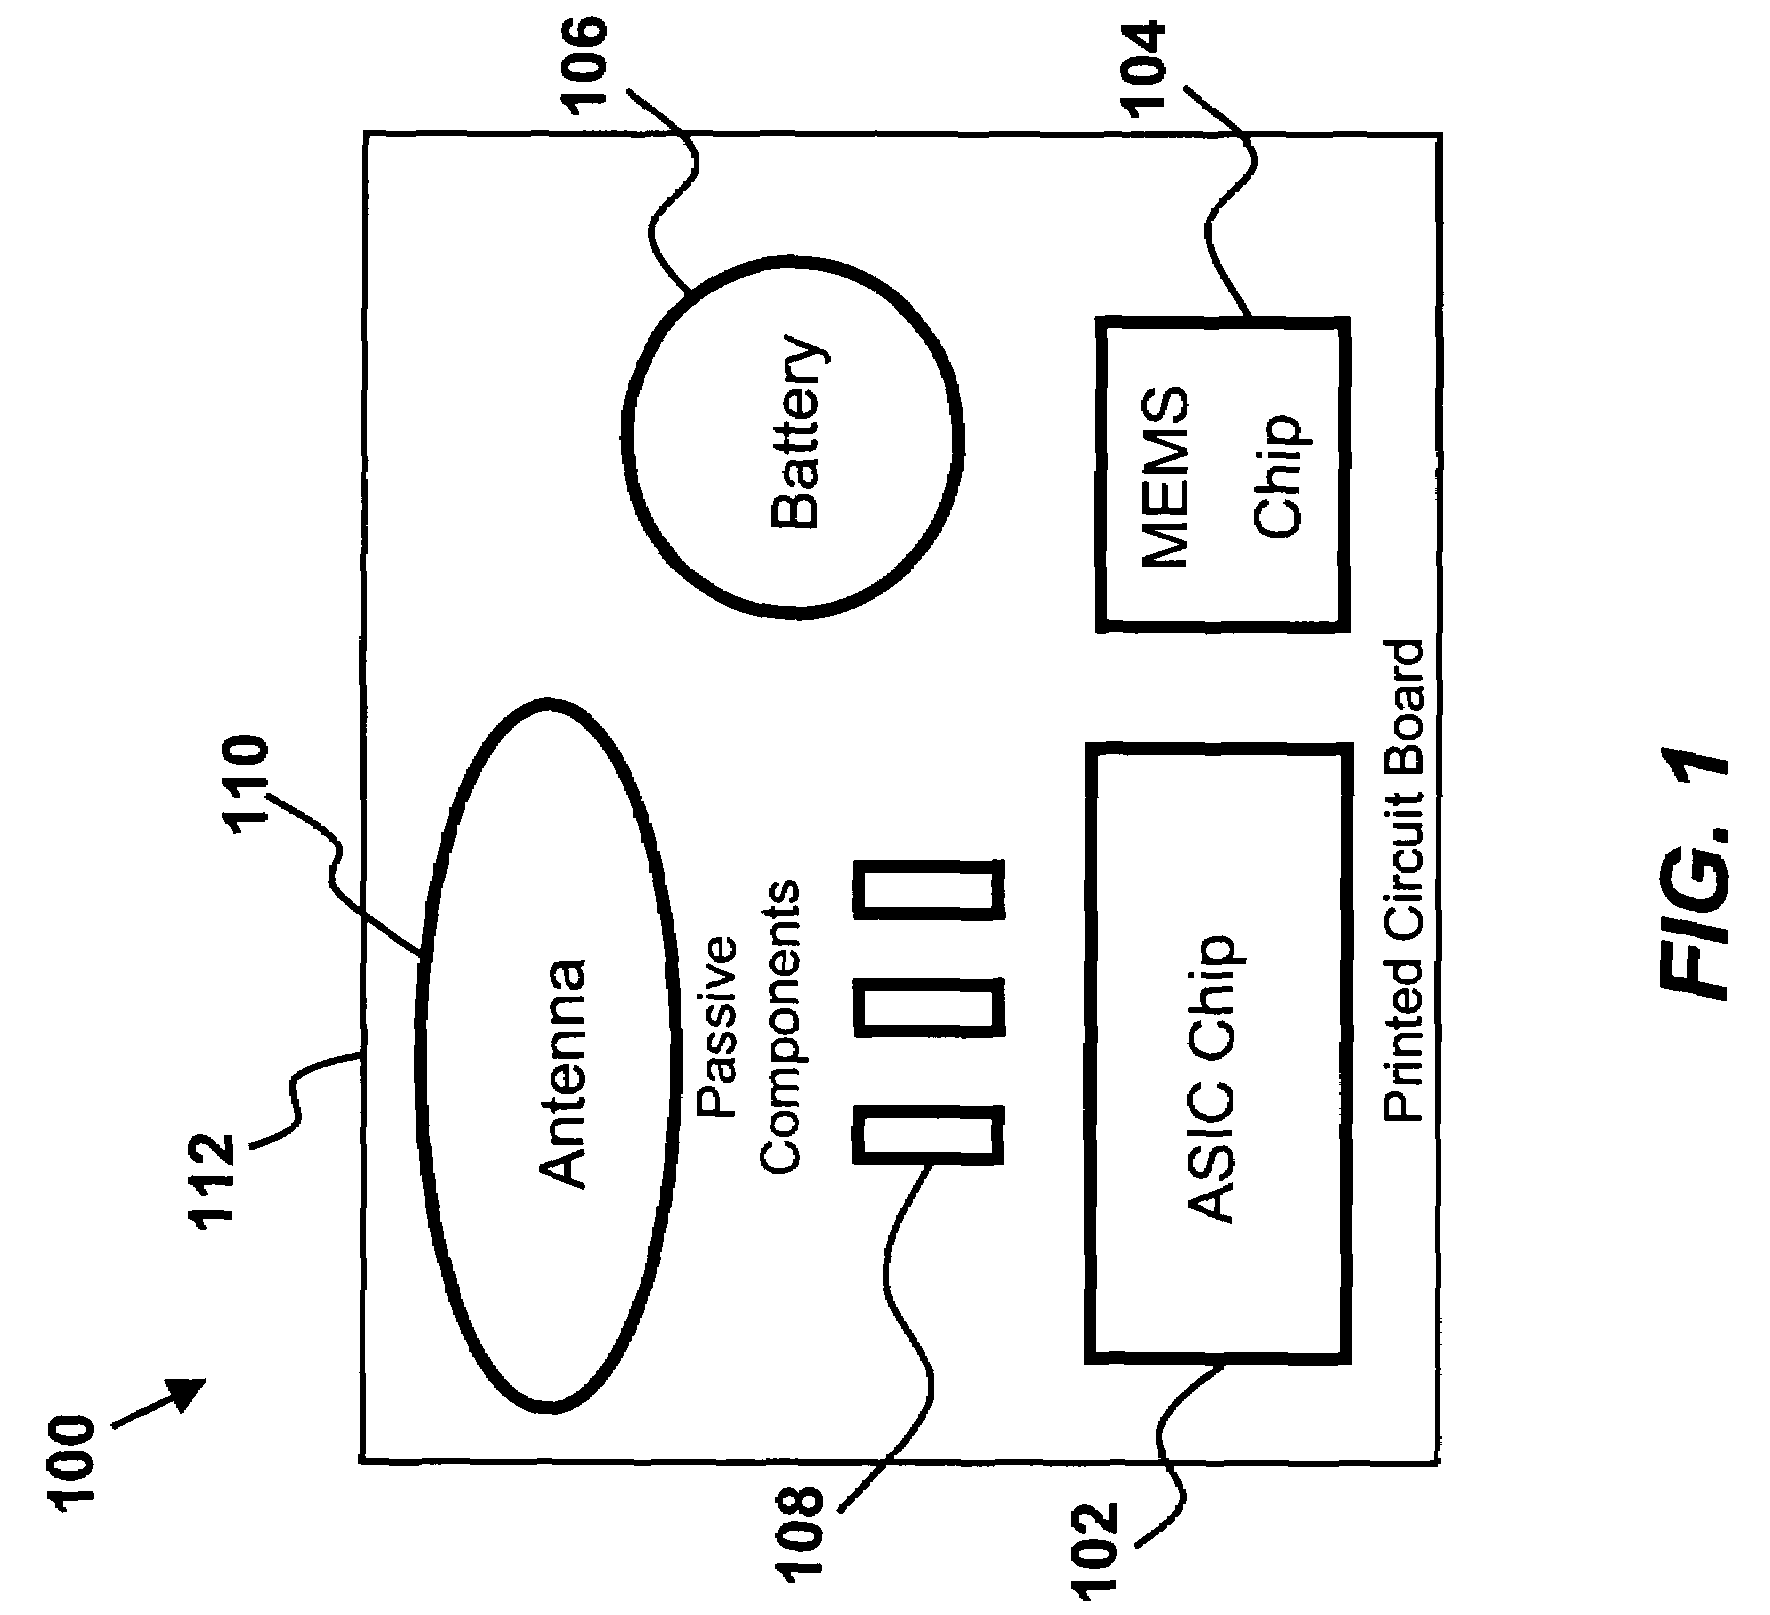 Signal conditioning methods and circuits for a capacitive sensing integrated tire pressure sensor